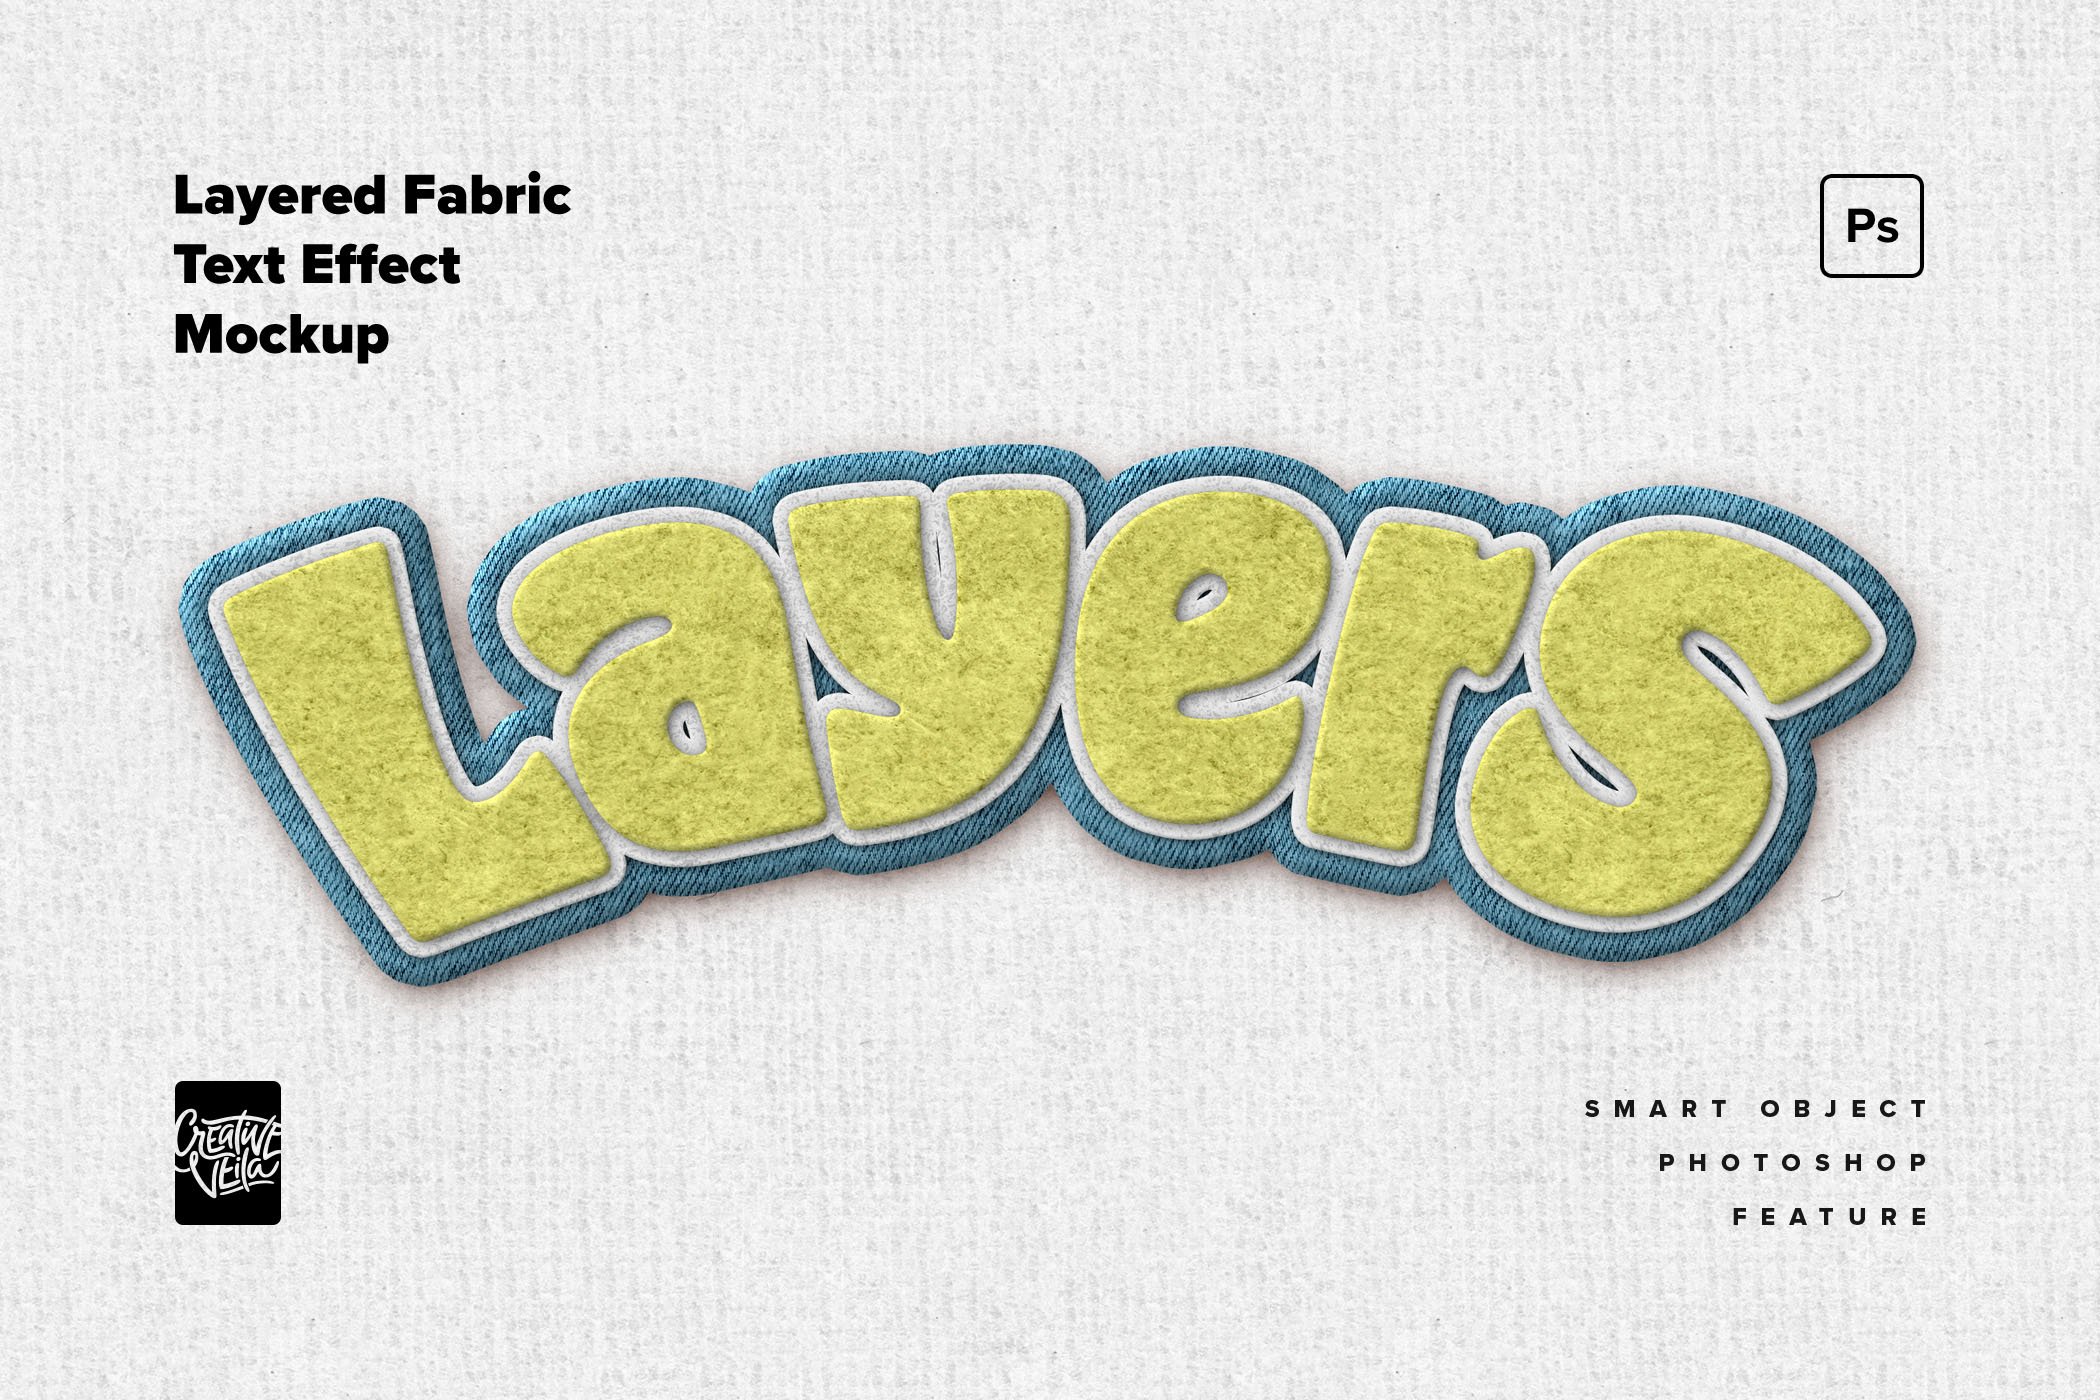 layered fabric text effect mockup by creative veila 04 86